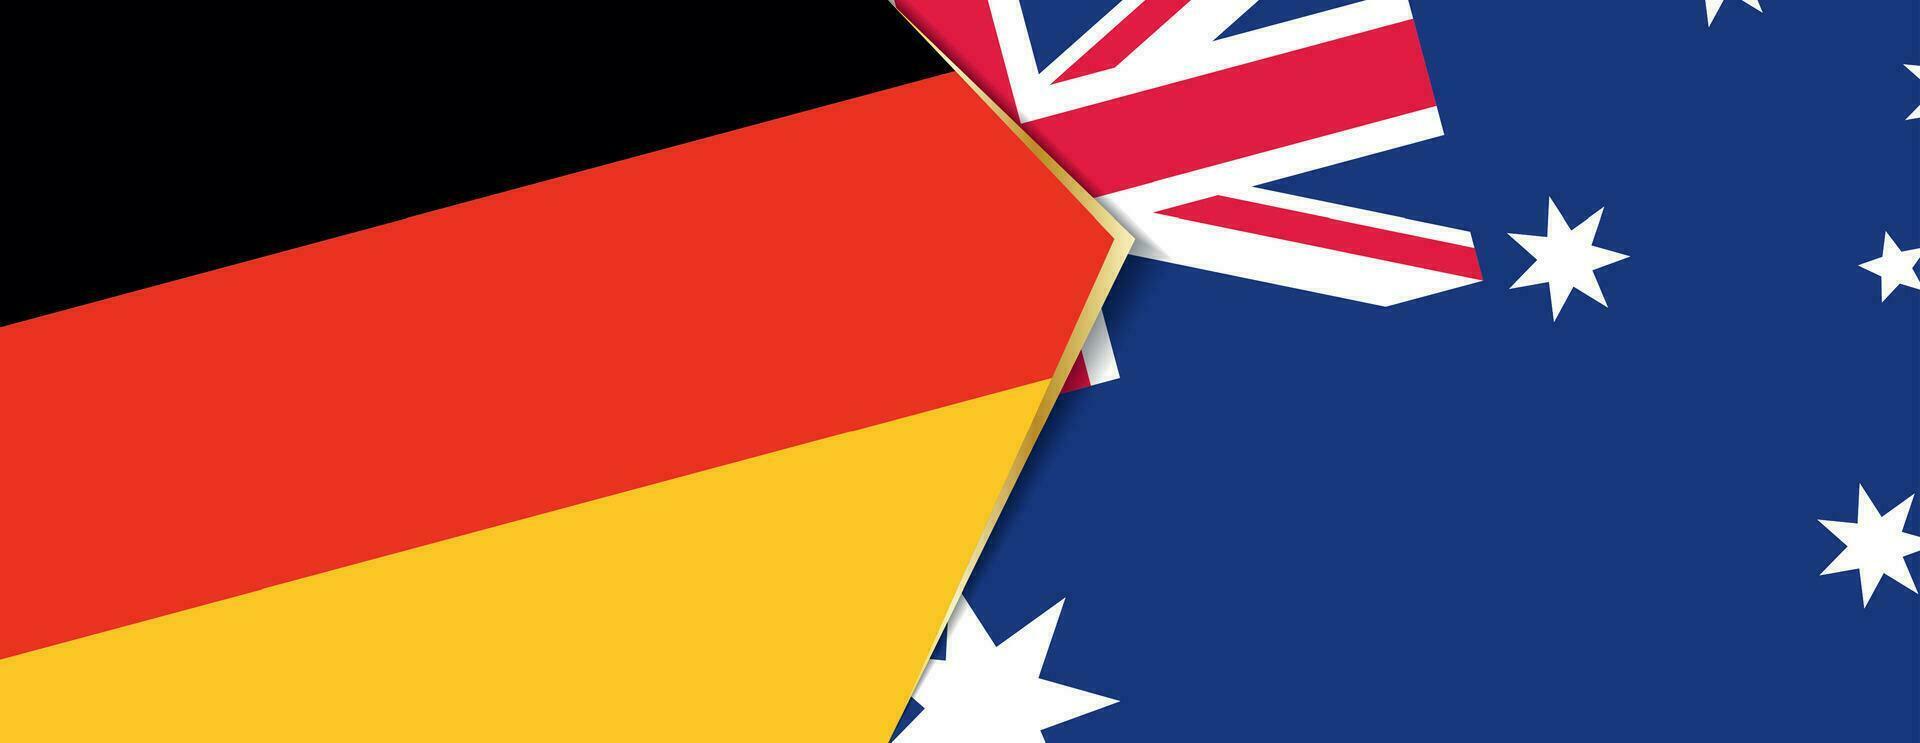 Germany and Australia flags, two vector flags.